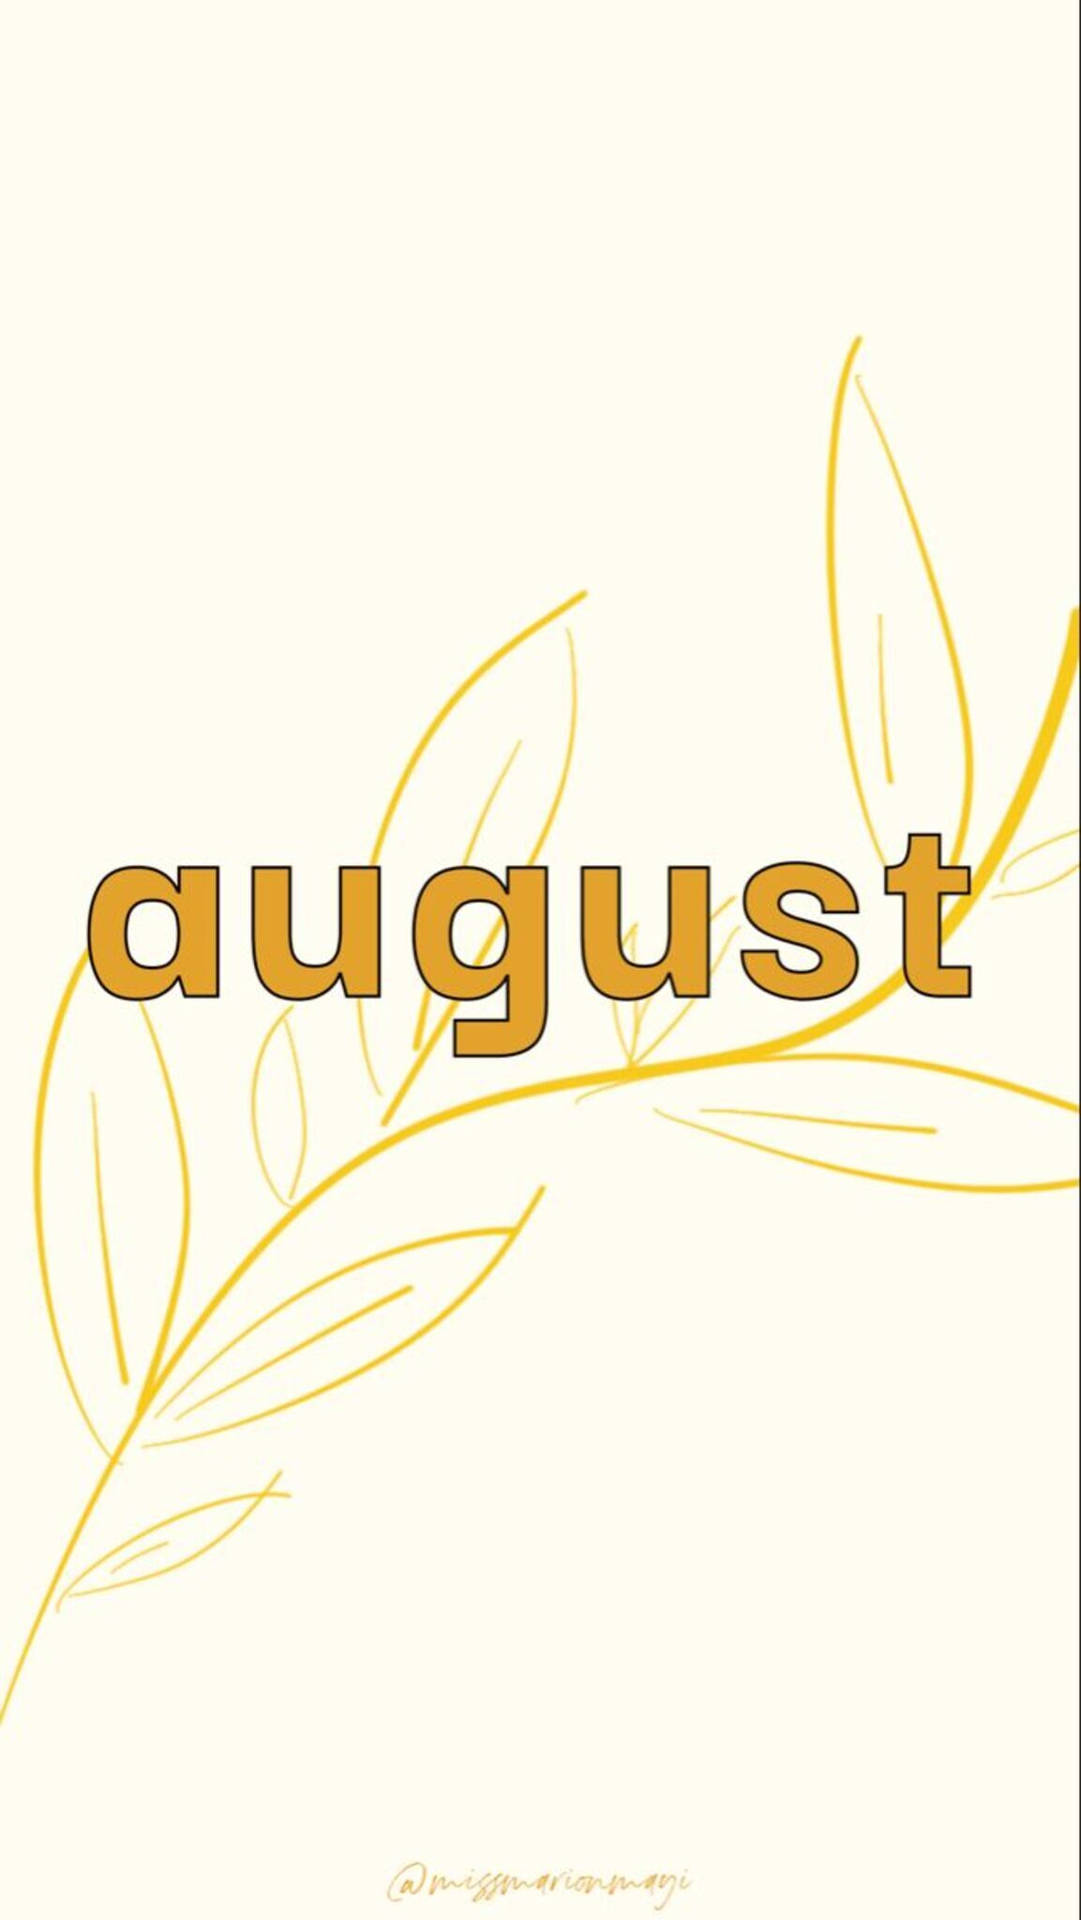 The Golden Hue Of August Background